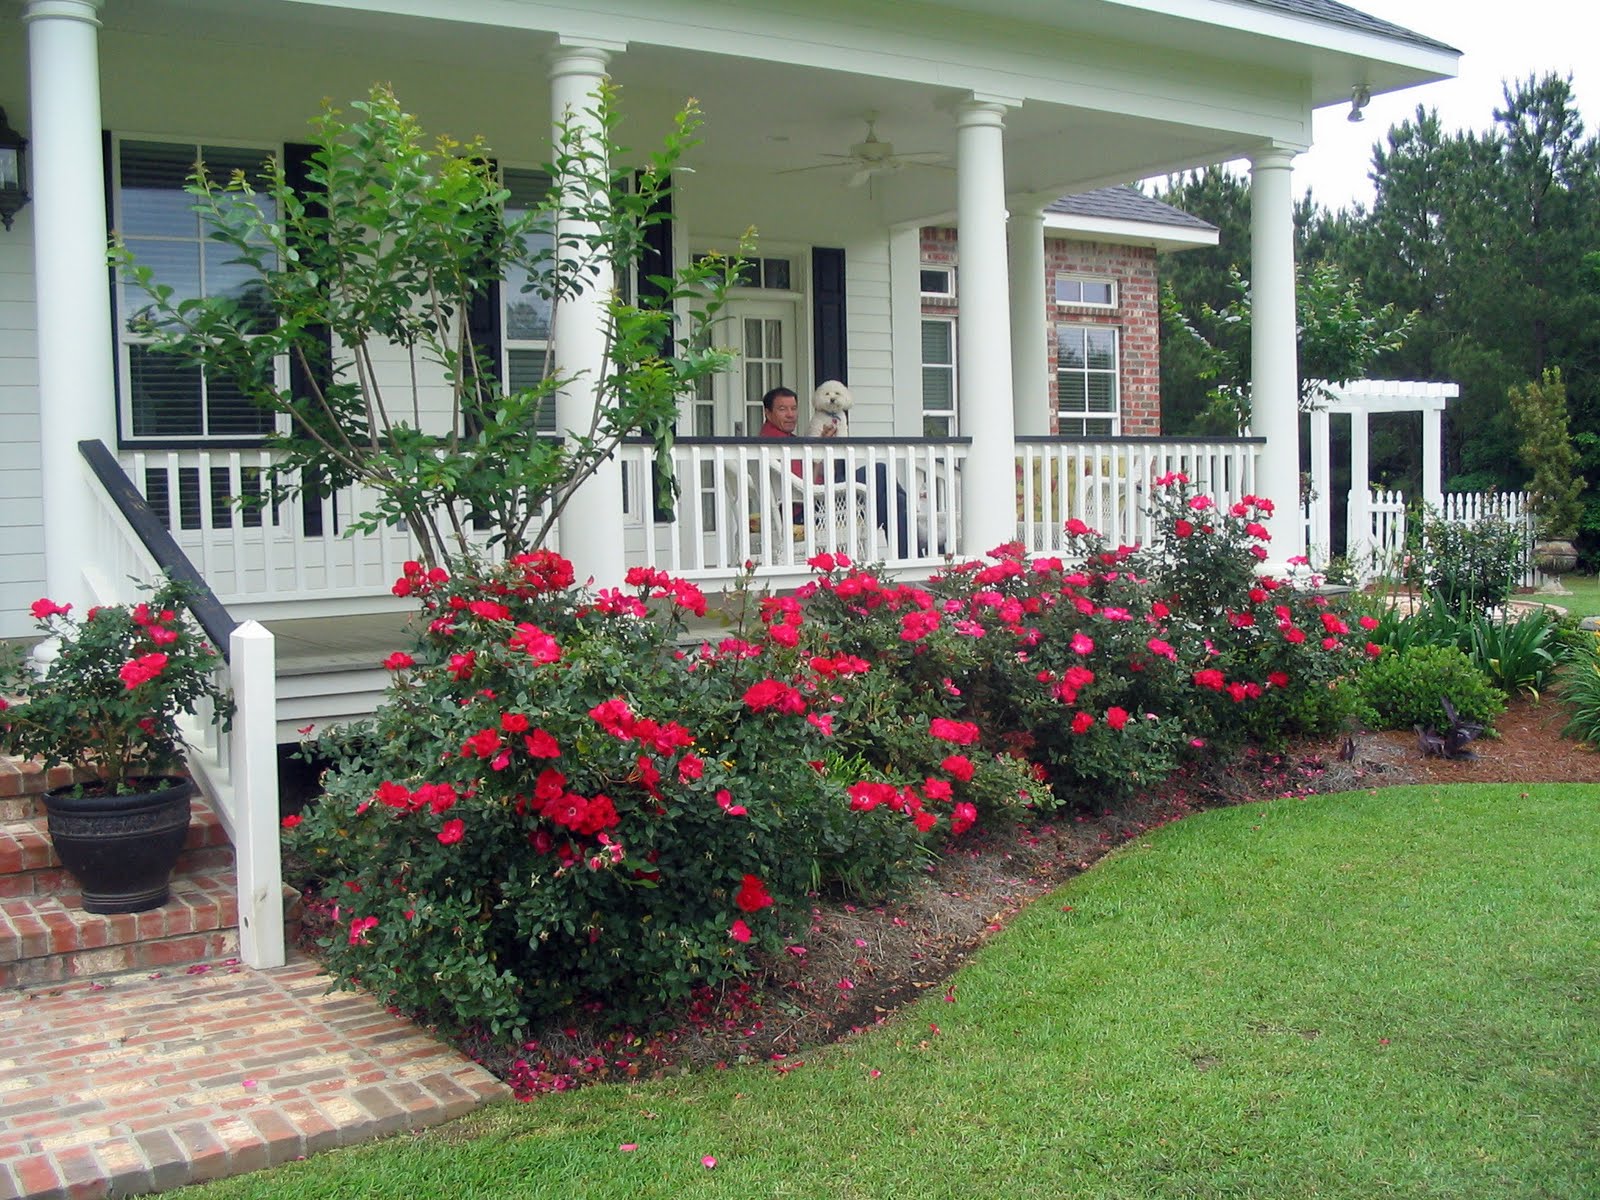 A Southern Belle Dishes on Decor: My Life on the Front Porch